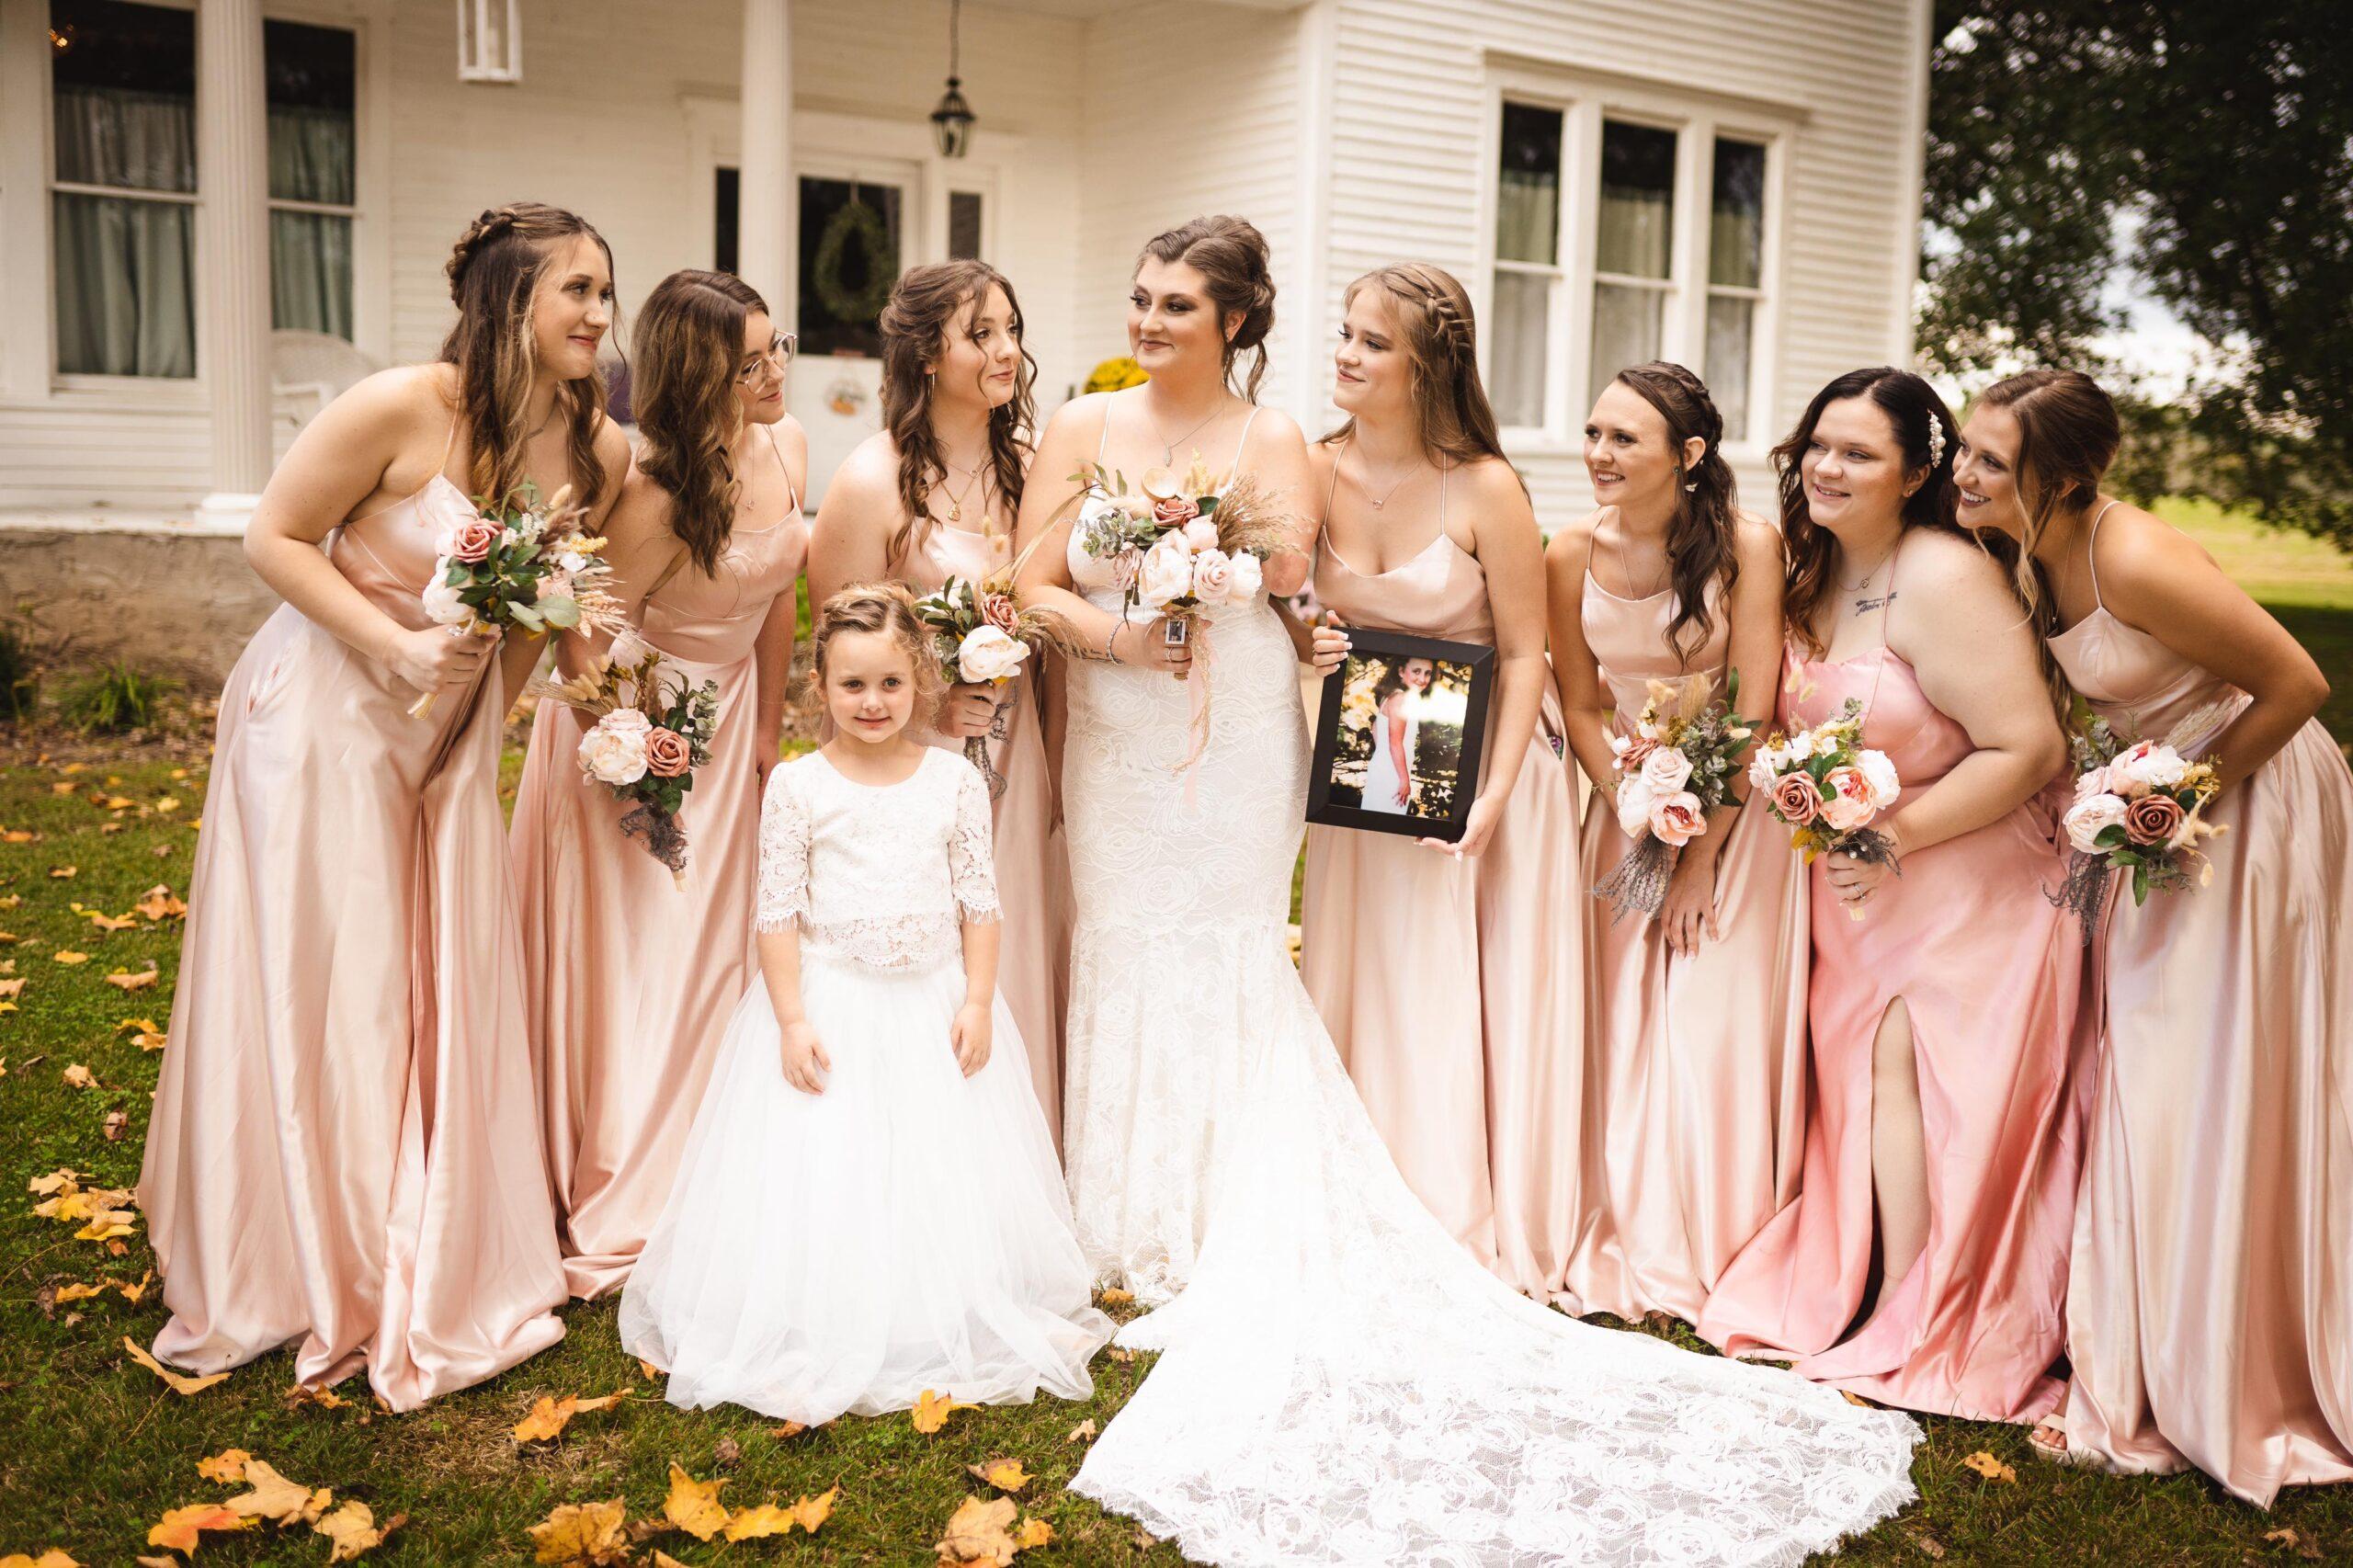 Bride with Bridesmaids and flower girl